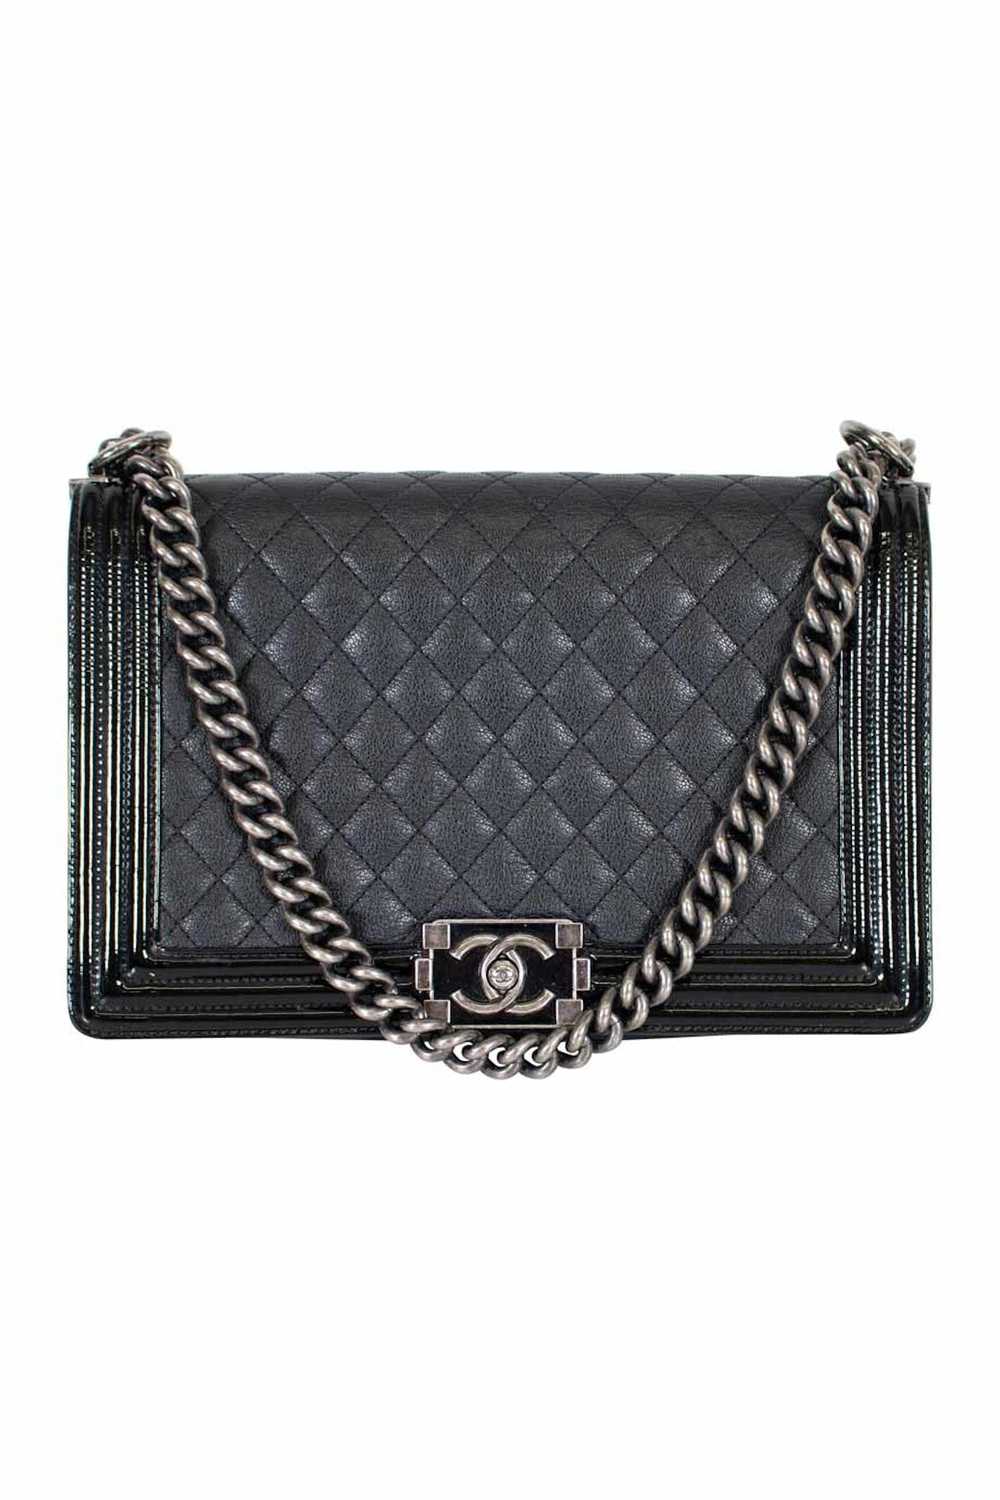 Chanel CHANEL Black grained calfskin quilted 'Boy… - image 1